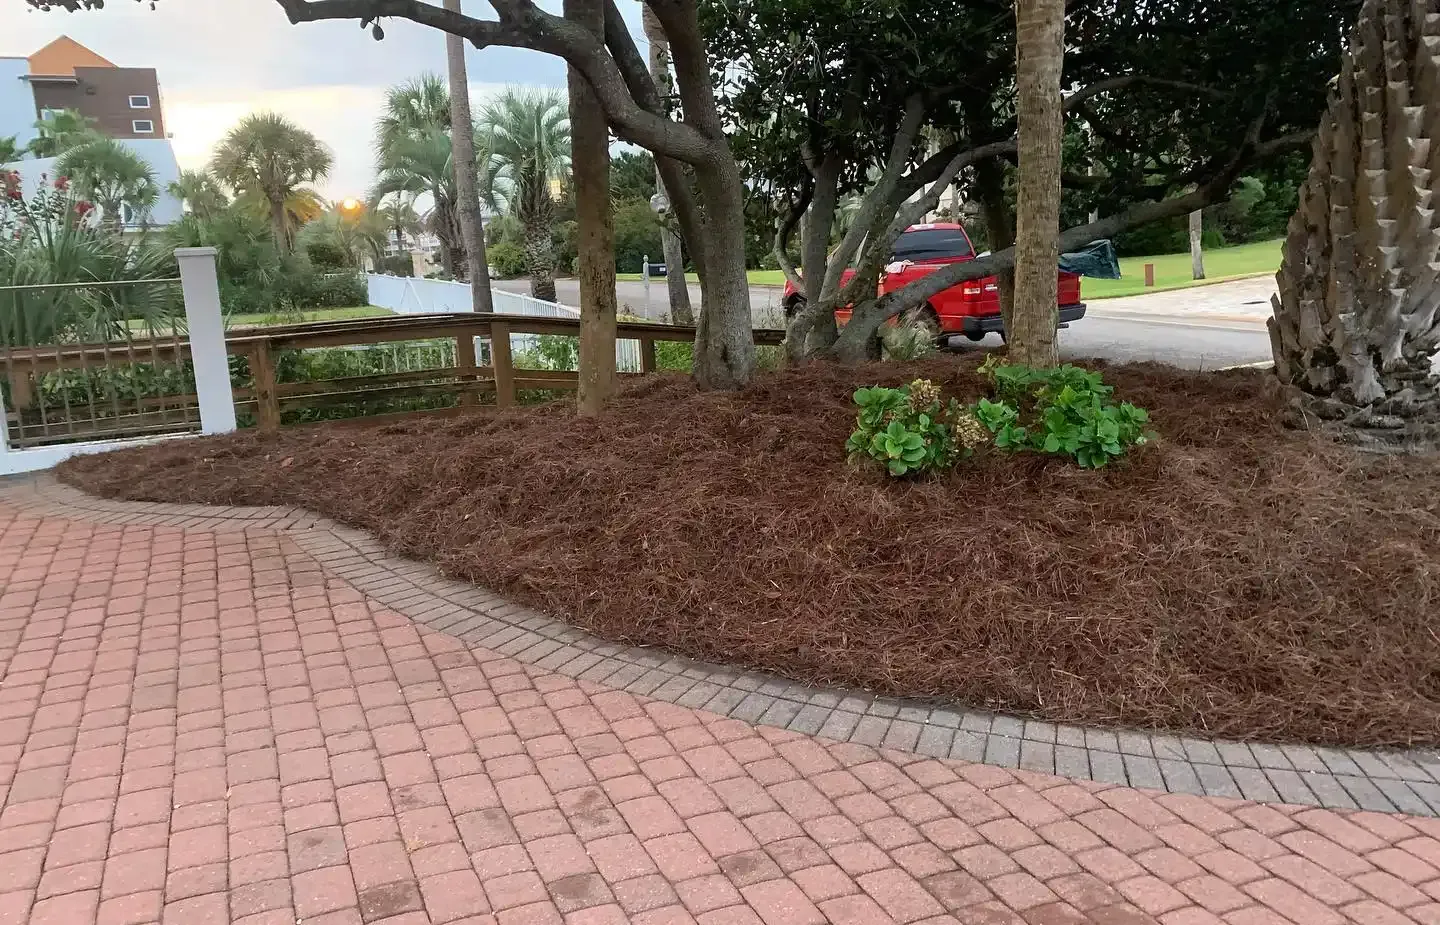 All Photos for Poarch Creek Landscaping in Santa Rosa Beach, FL